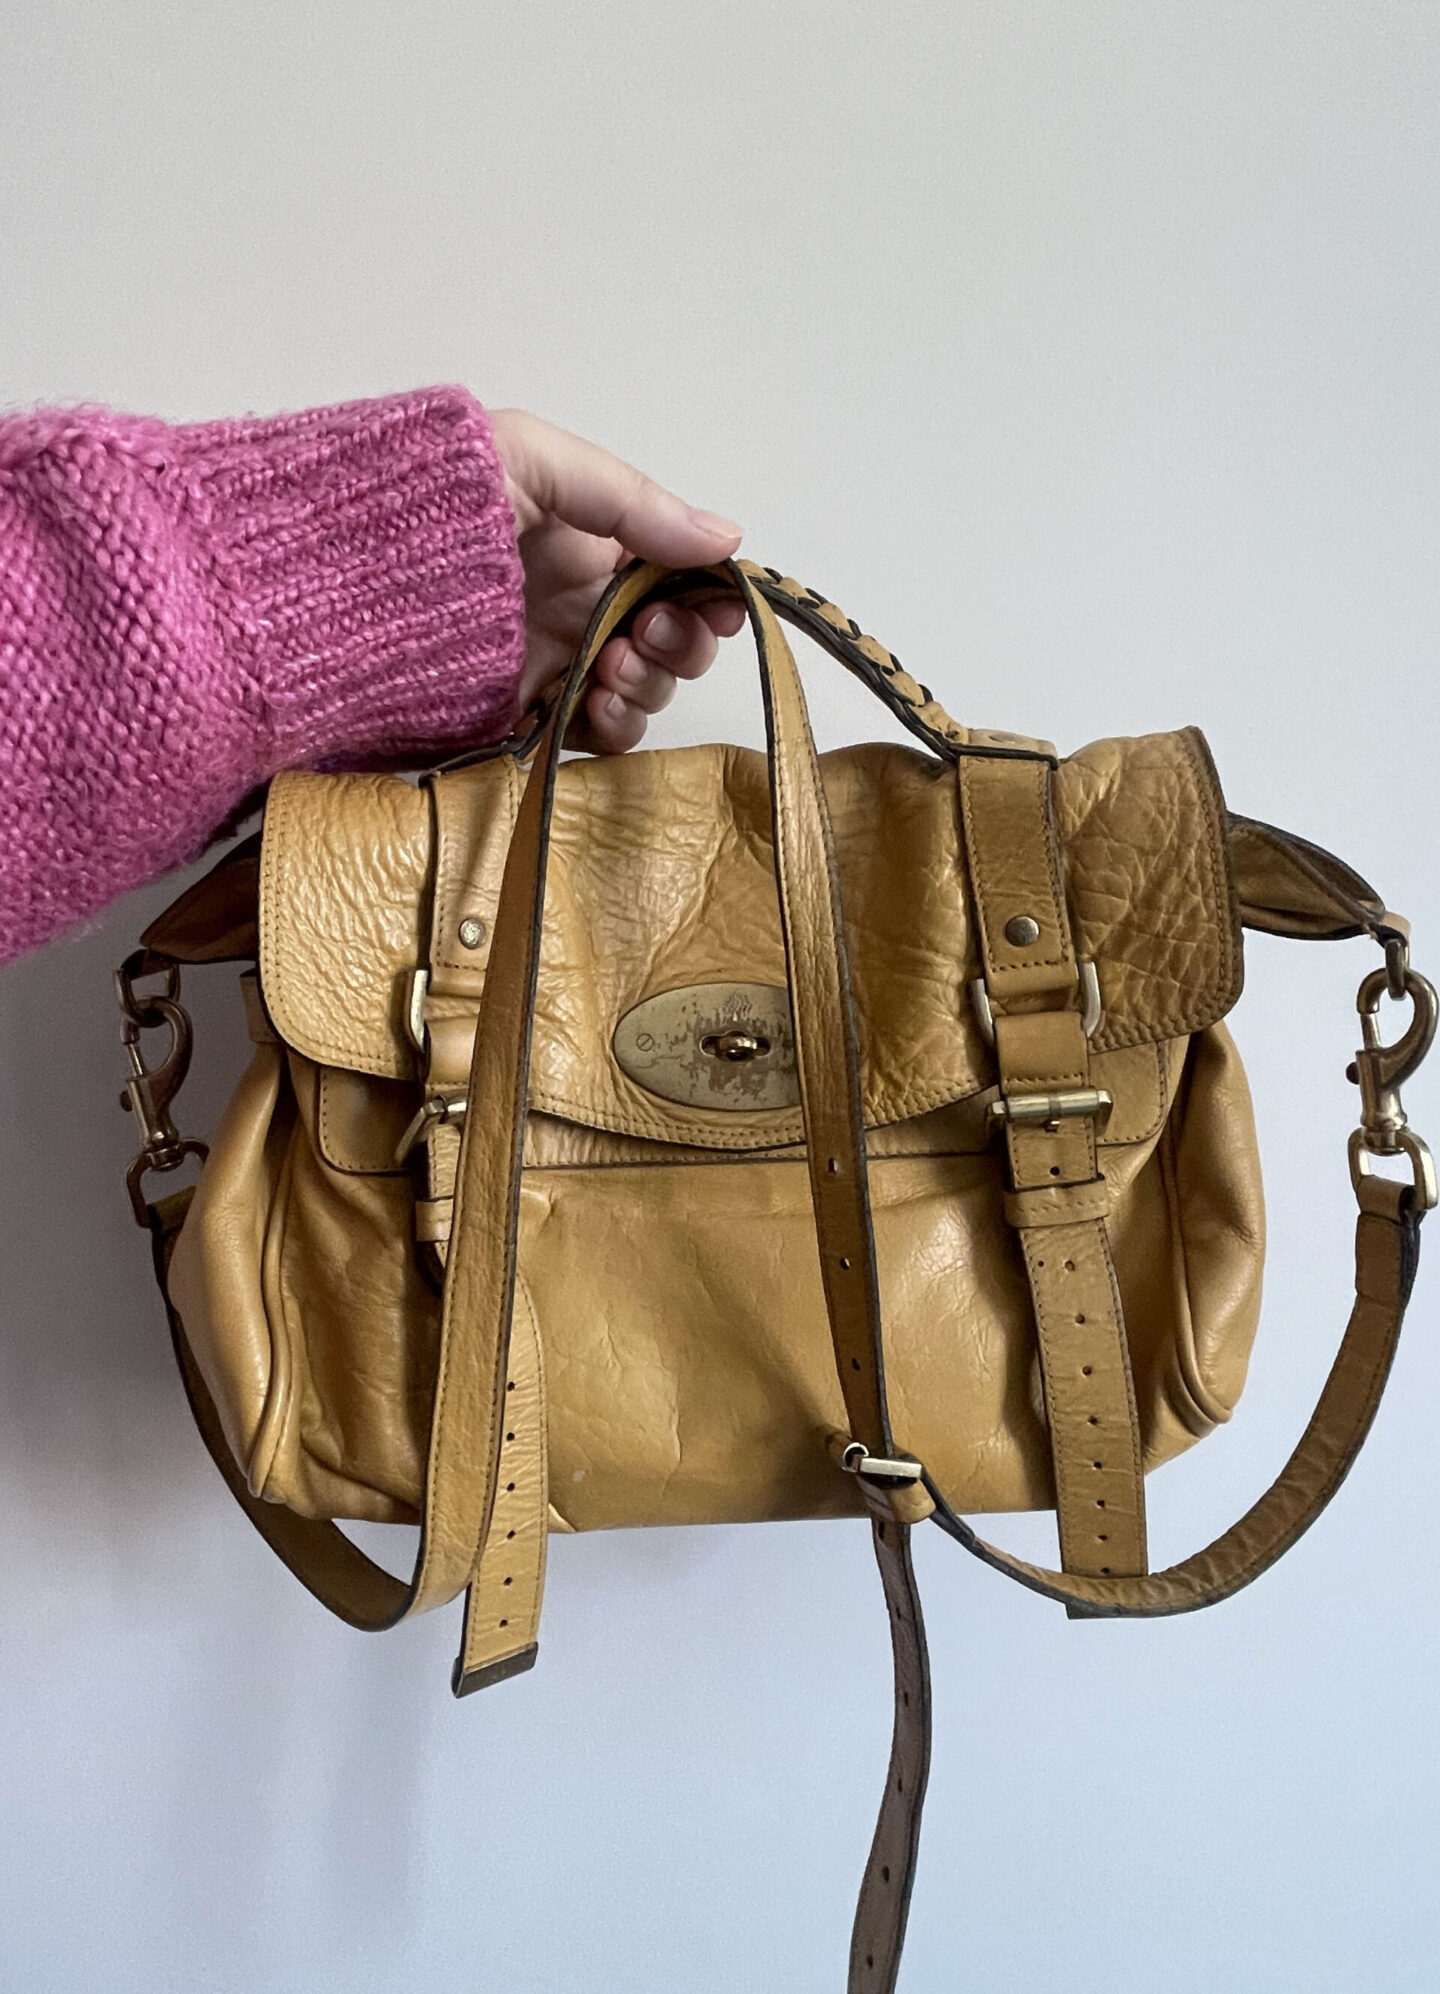 Mulberry bag DISCOUNT & Mulberry bag sales : Read before Buying!